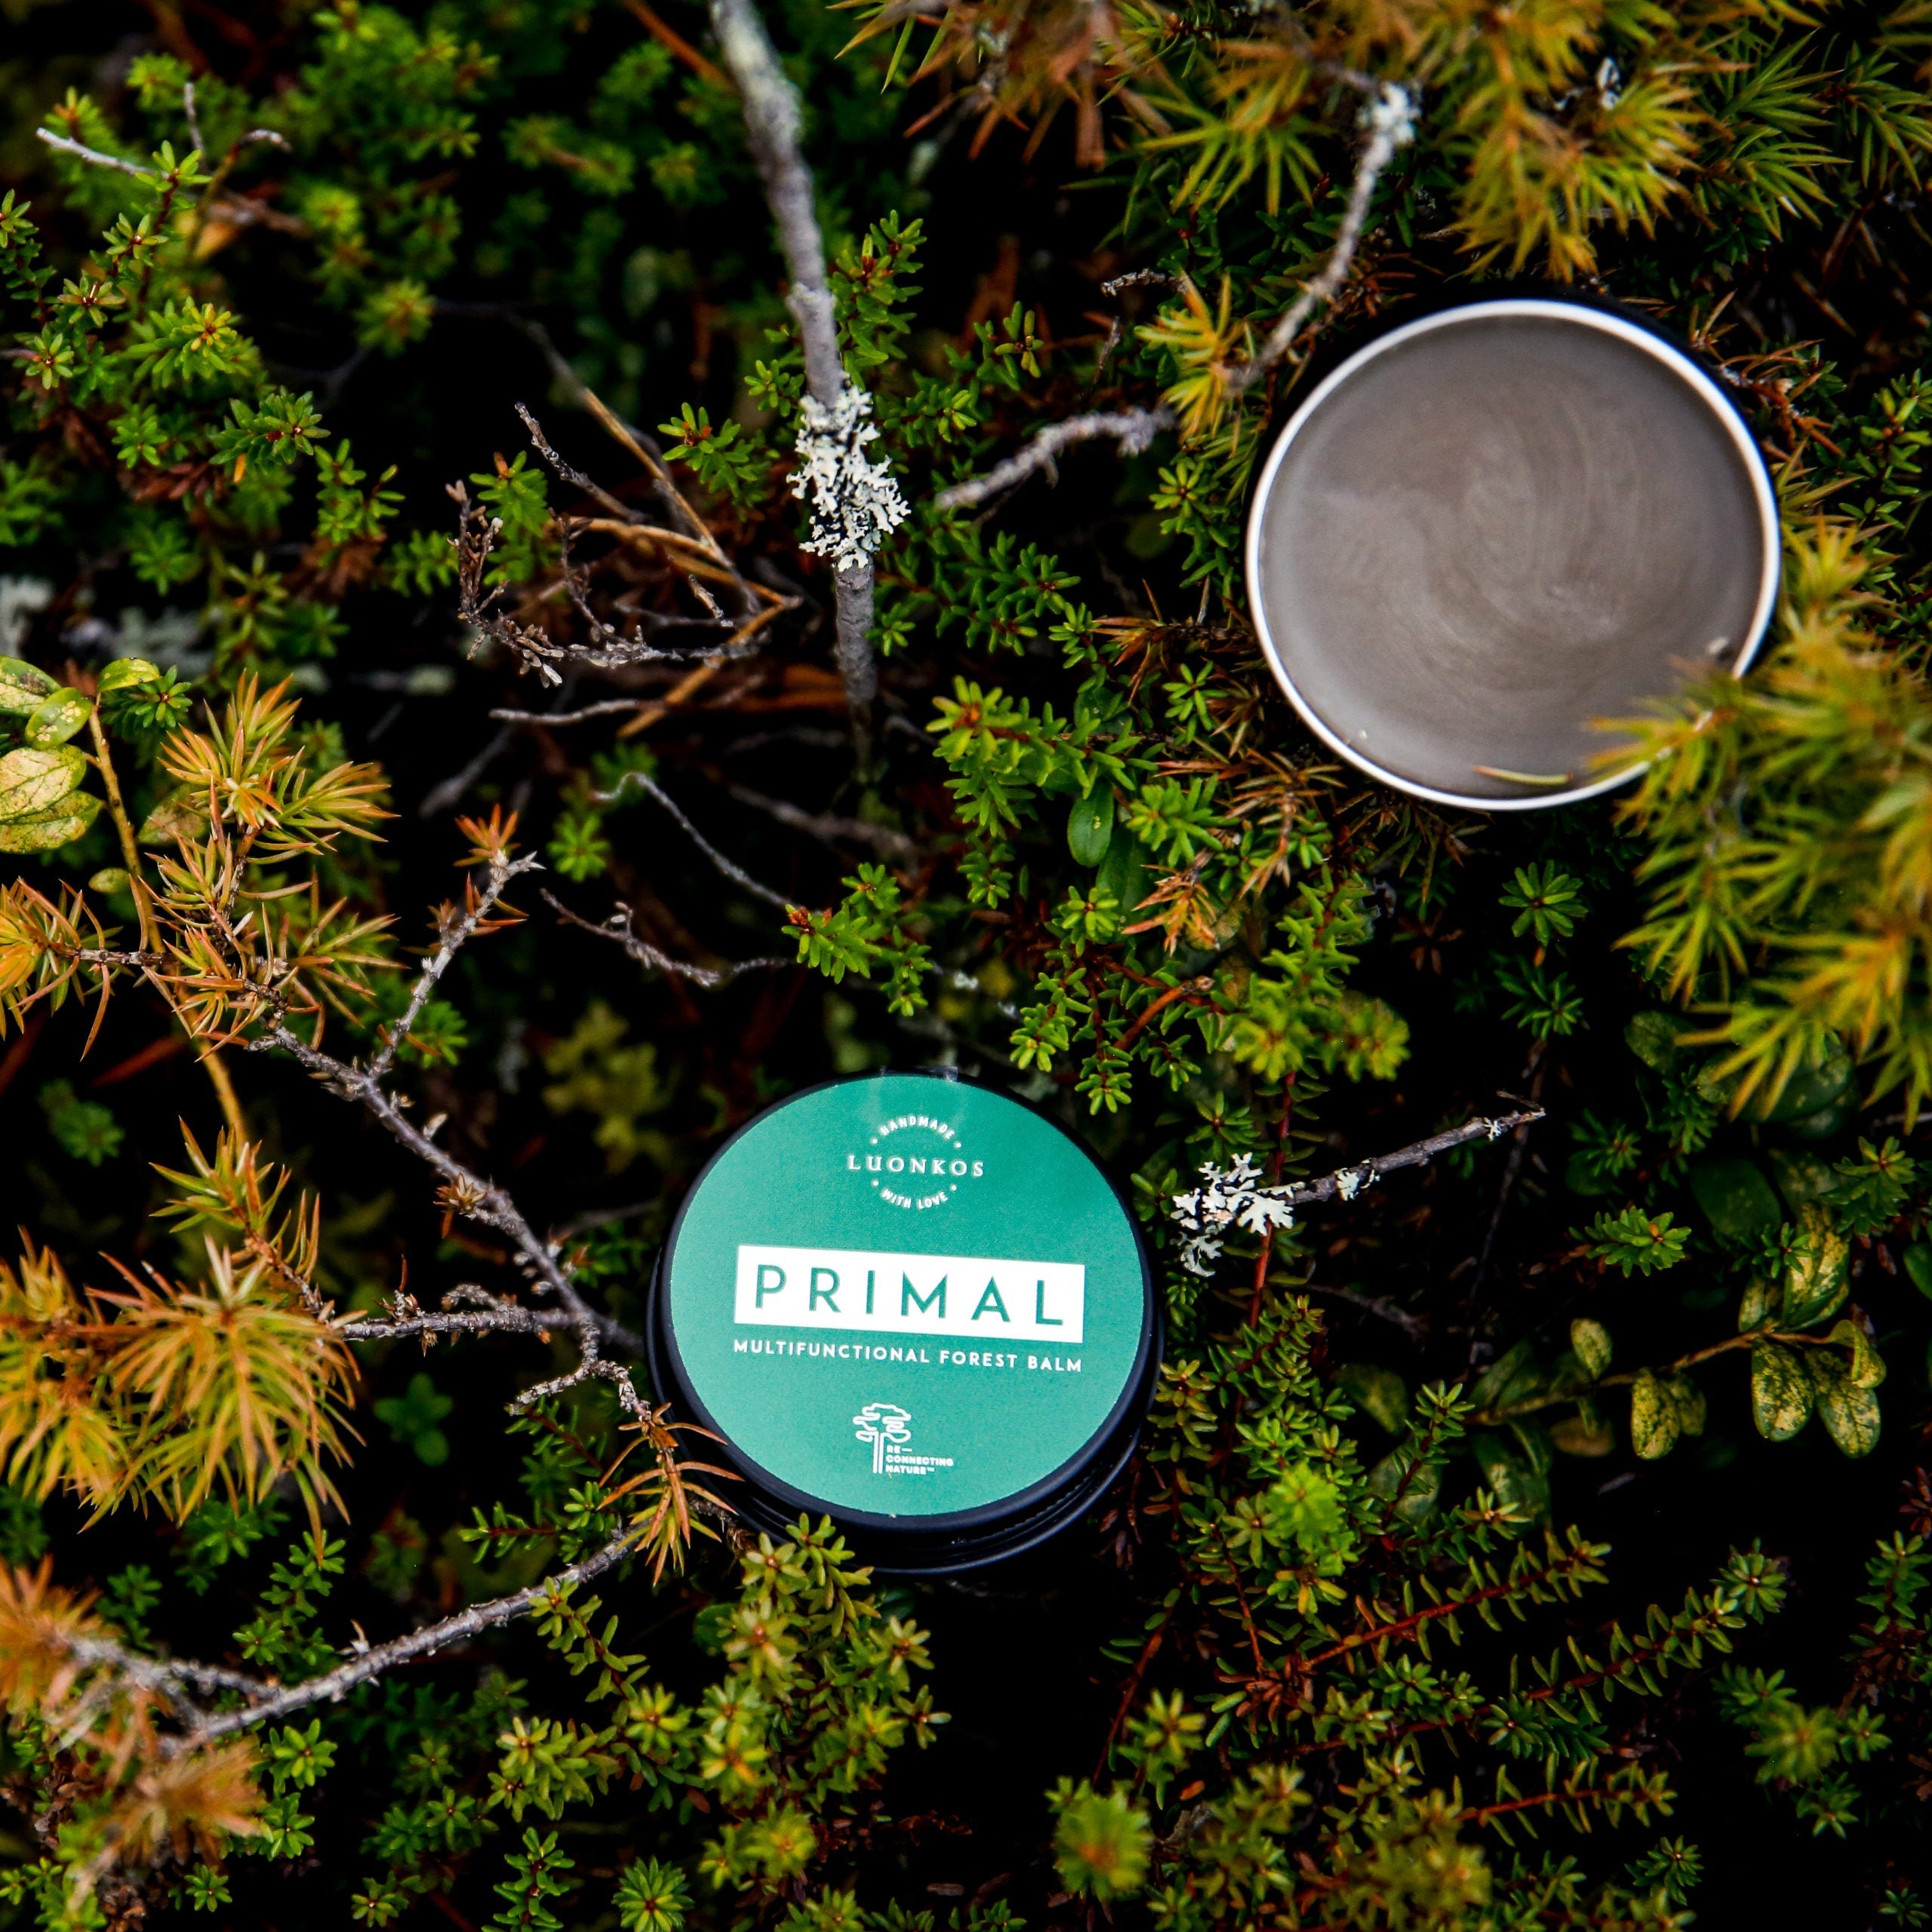 Primal Multifunctional Forest Balm - Forest Microbes